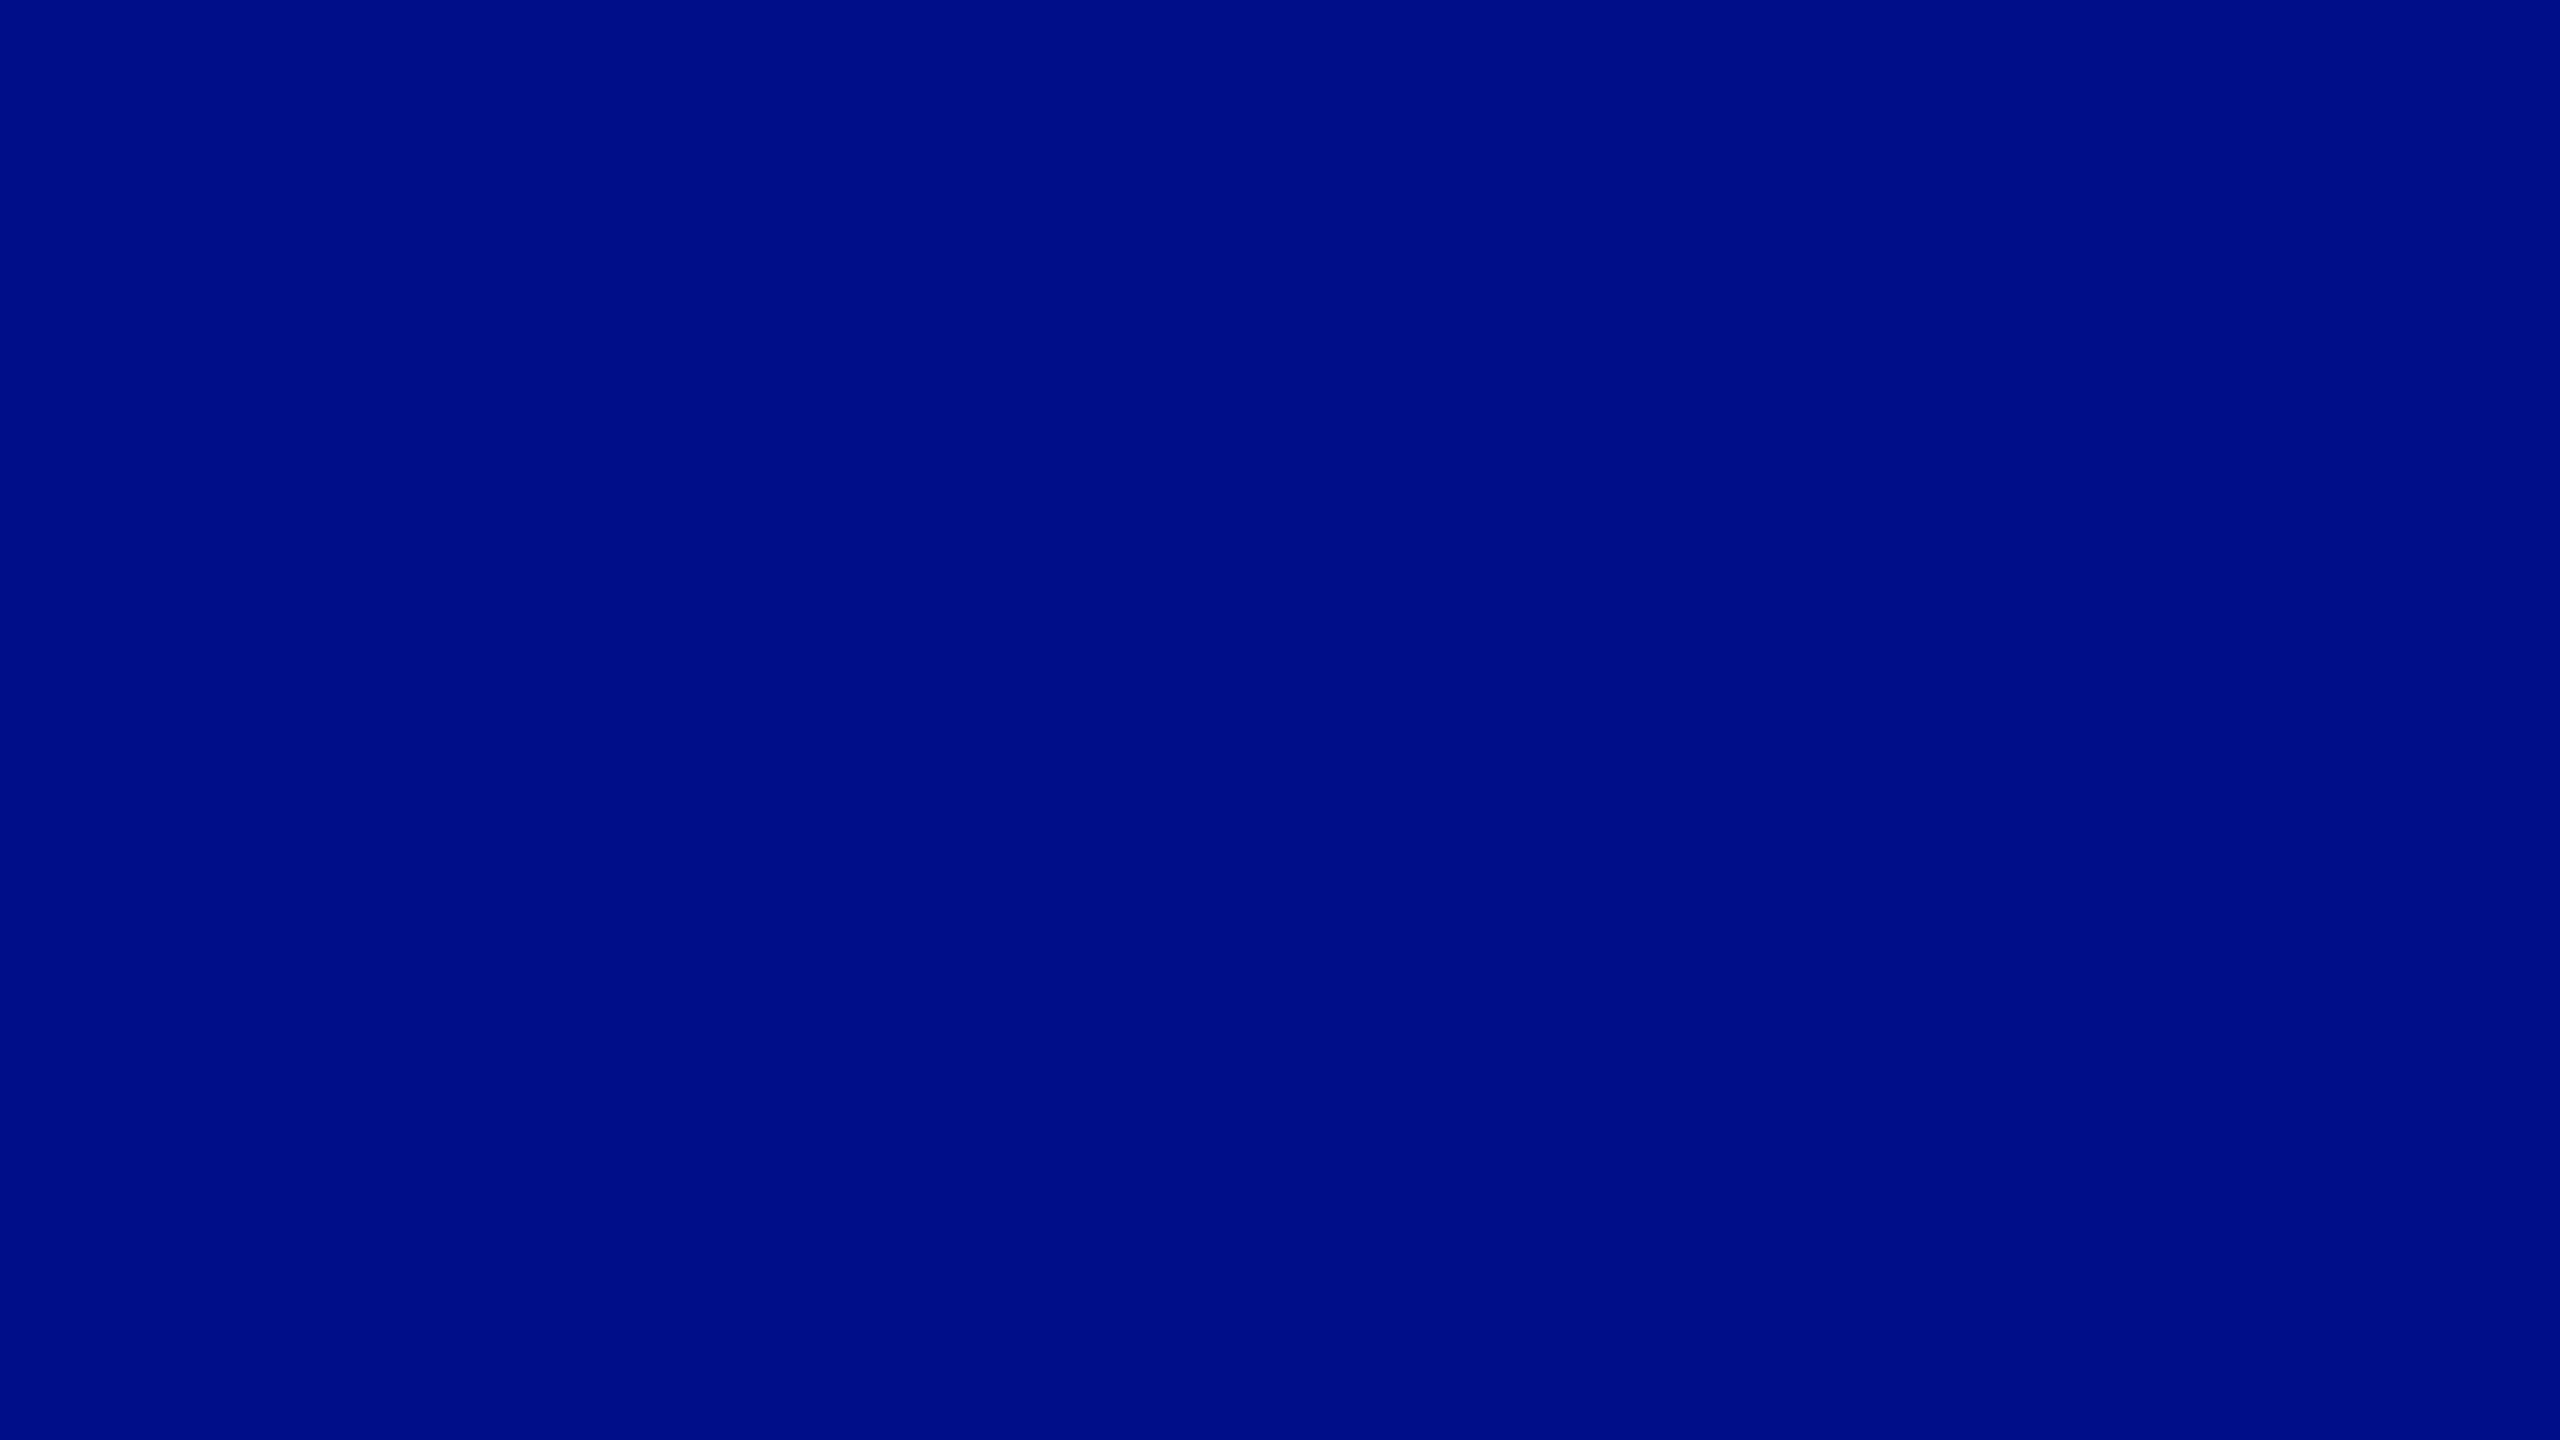 2560x1440 Phthalo Blue Solid Color Background